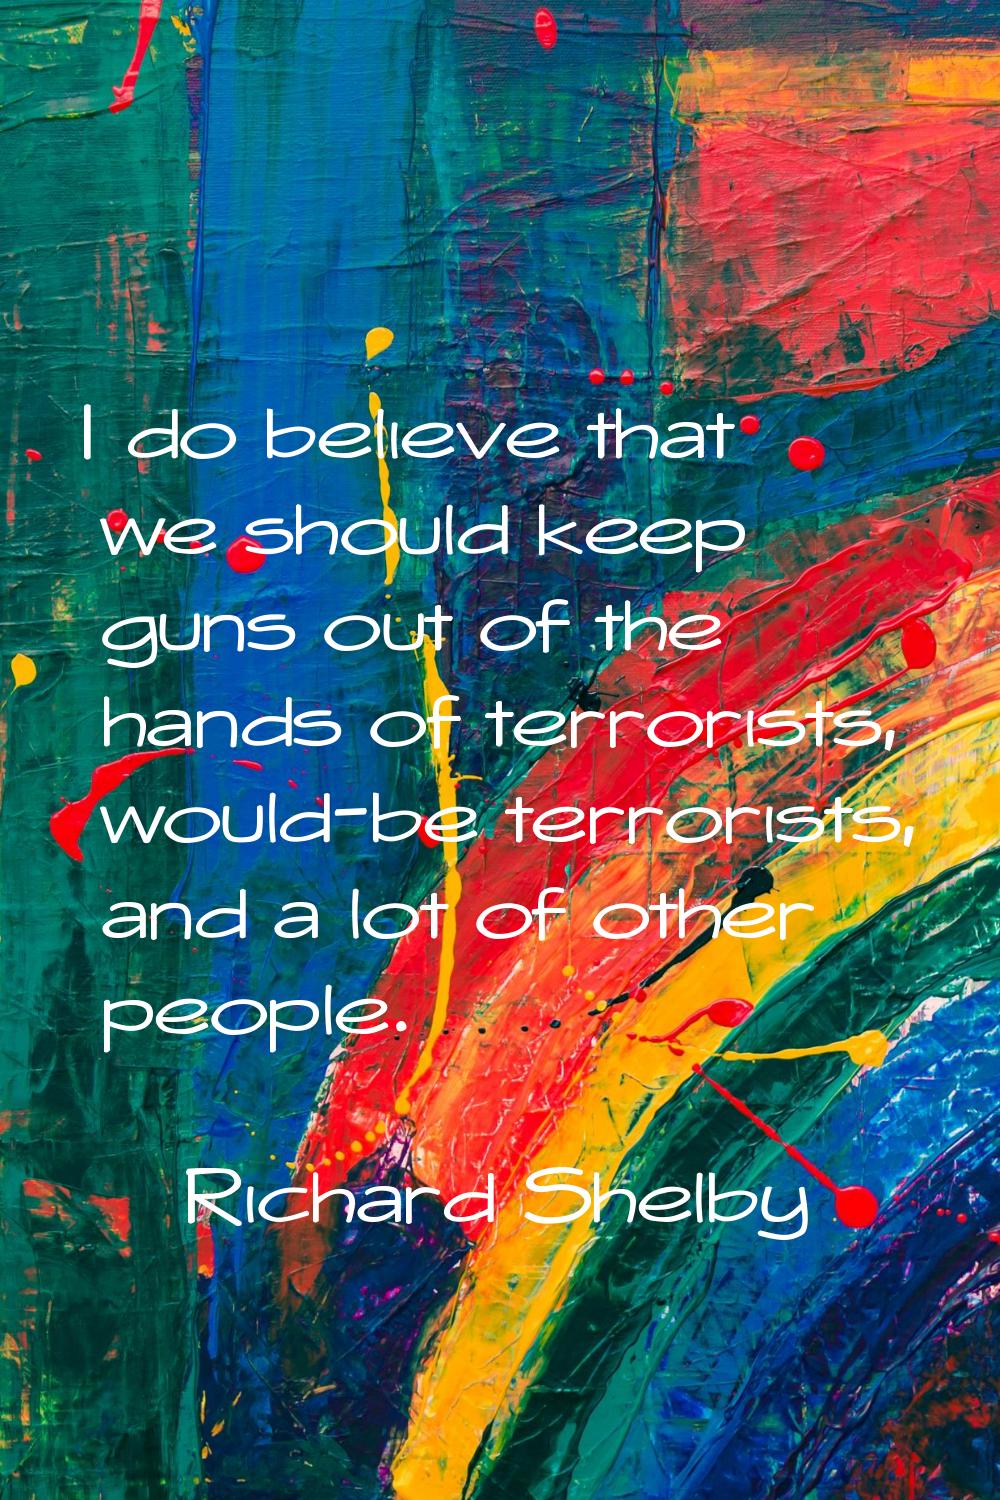 I do believe that we should keep guns out of the hands of terrorists, would-be terrorists, and a lo